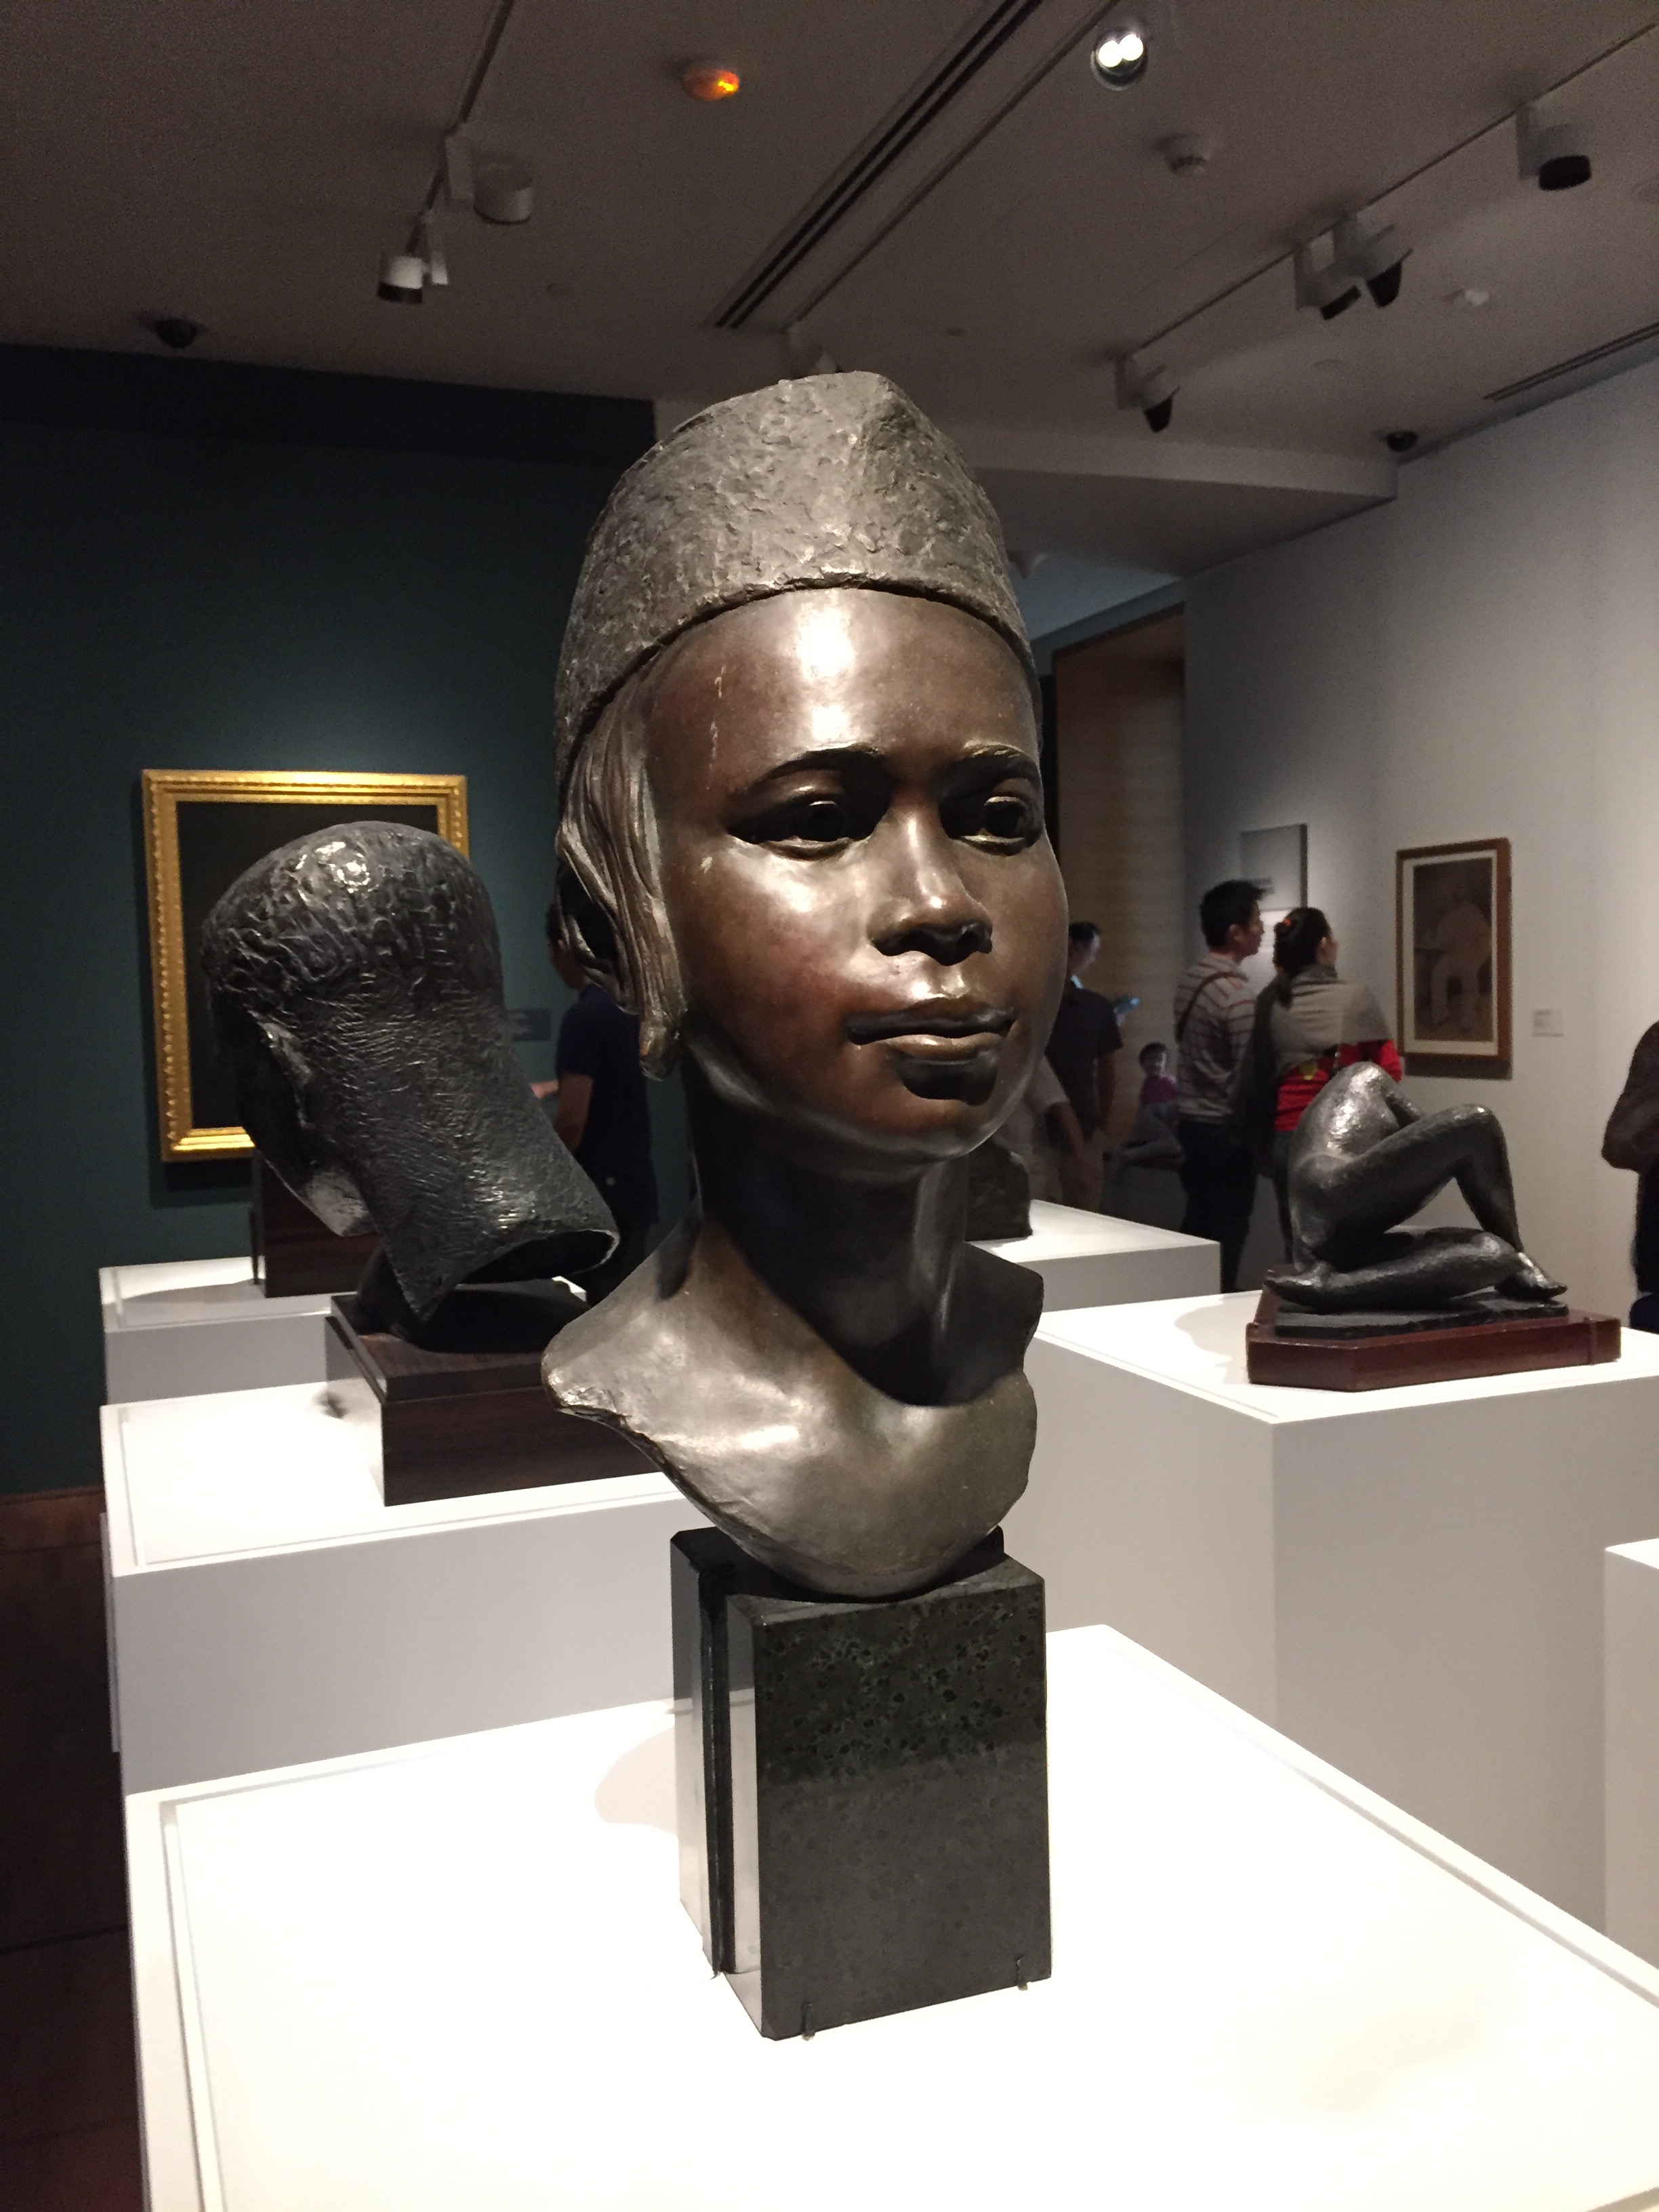 Malay Boy (c 1930s) by William G Stirling, National Gallery Singapore - 20160101